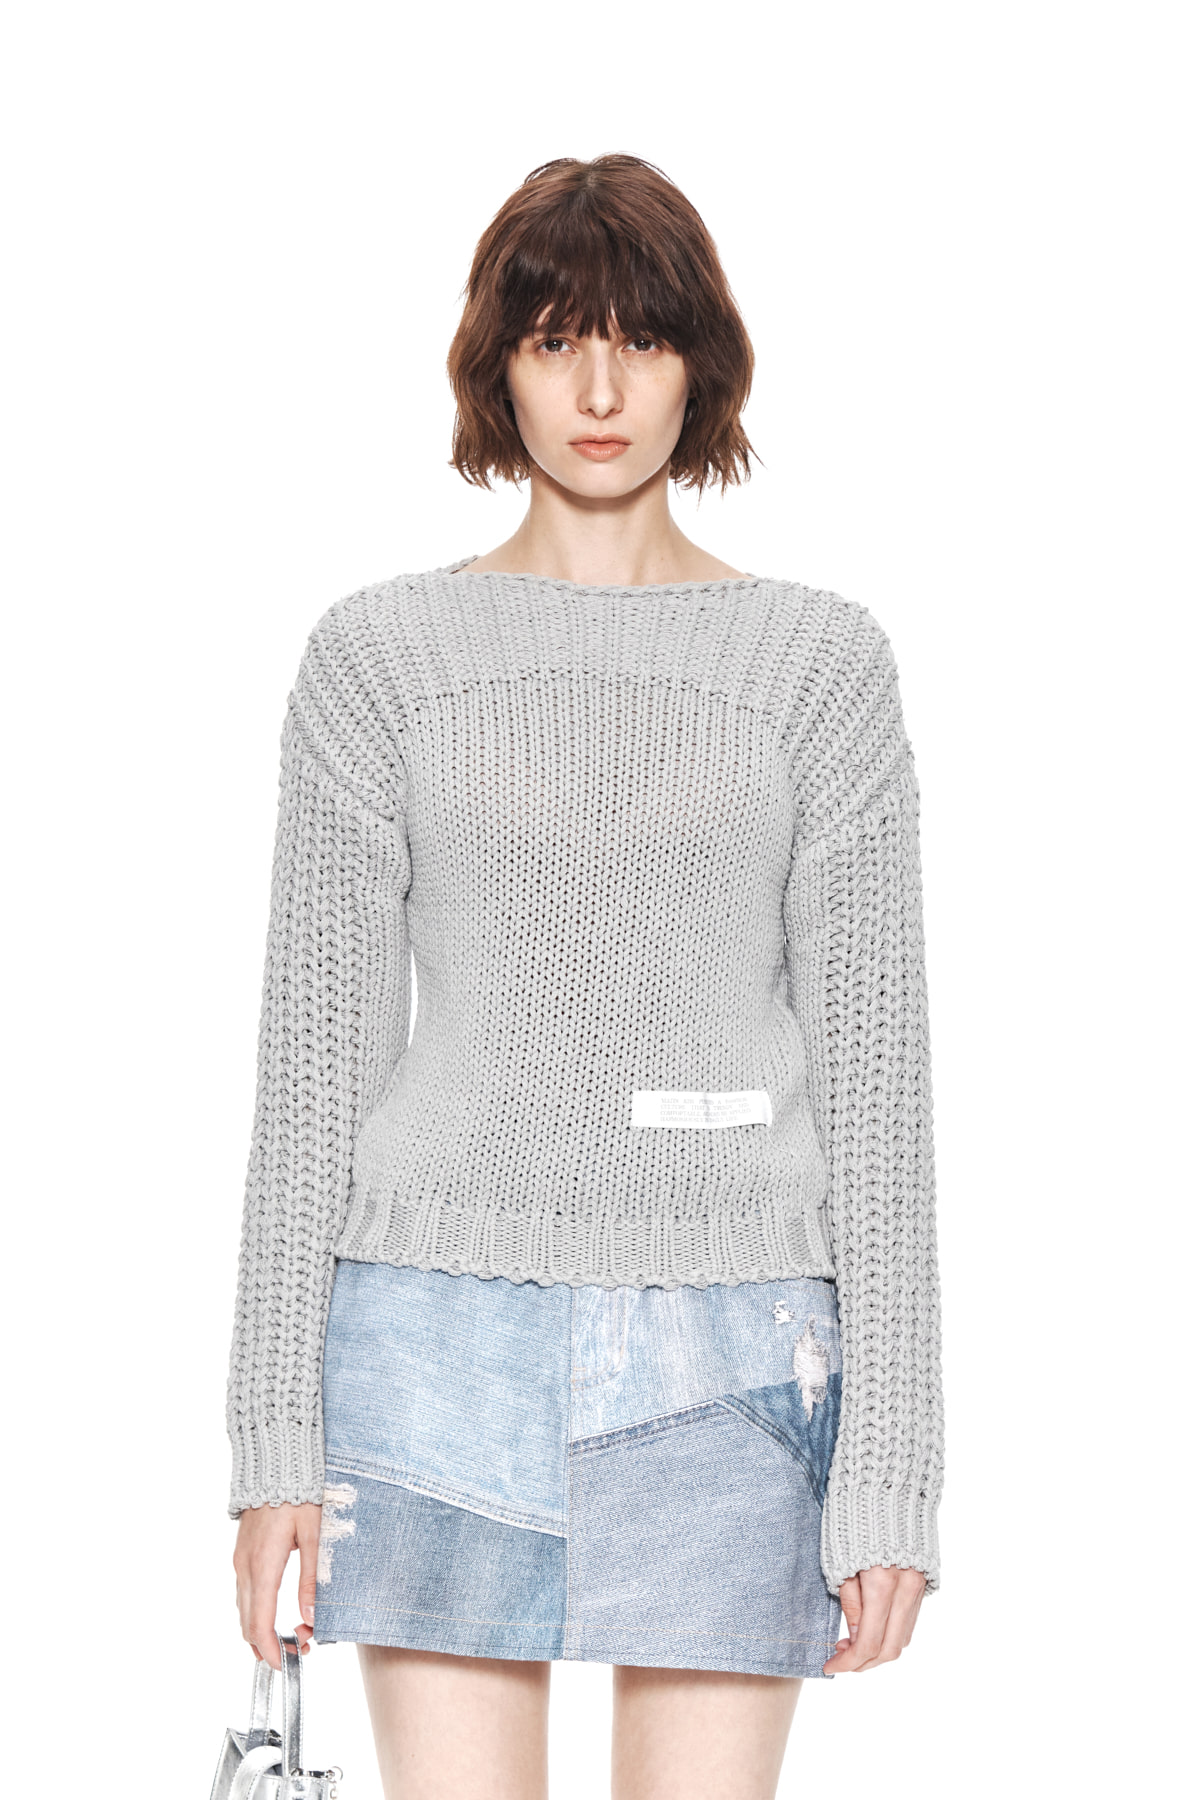 BRAID TEXTURE KNIT PULLOVER IN GREY